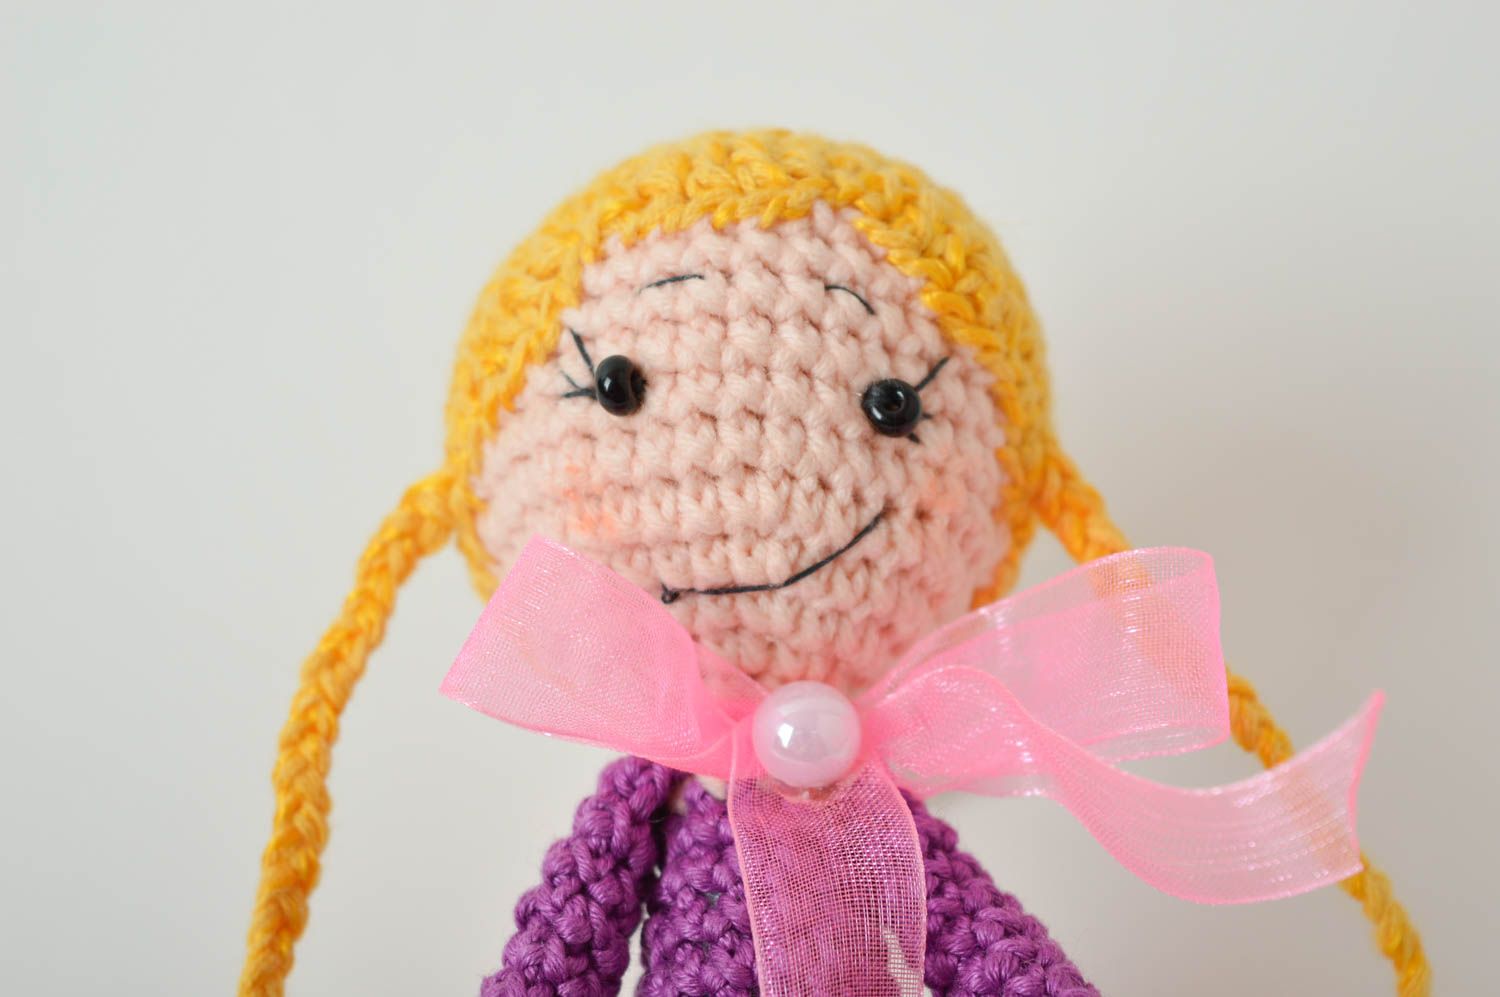 Cute doll handmade crocheted toy for children stuffed toys hand-crocheted toys photo 3